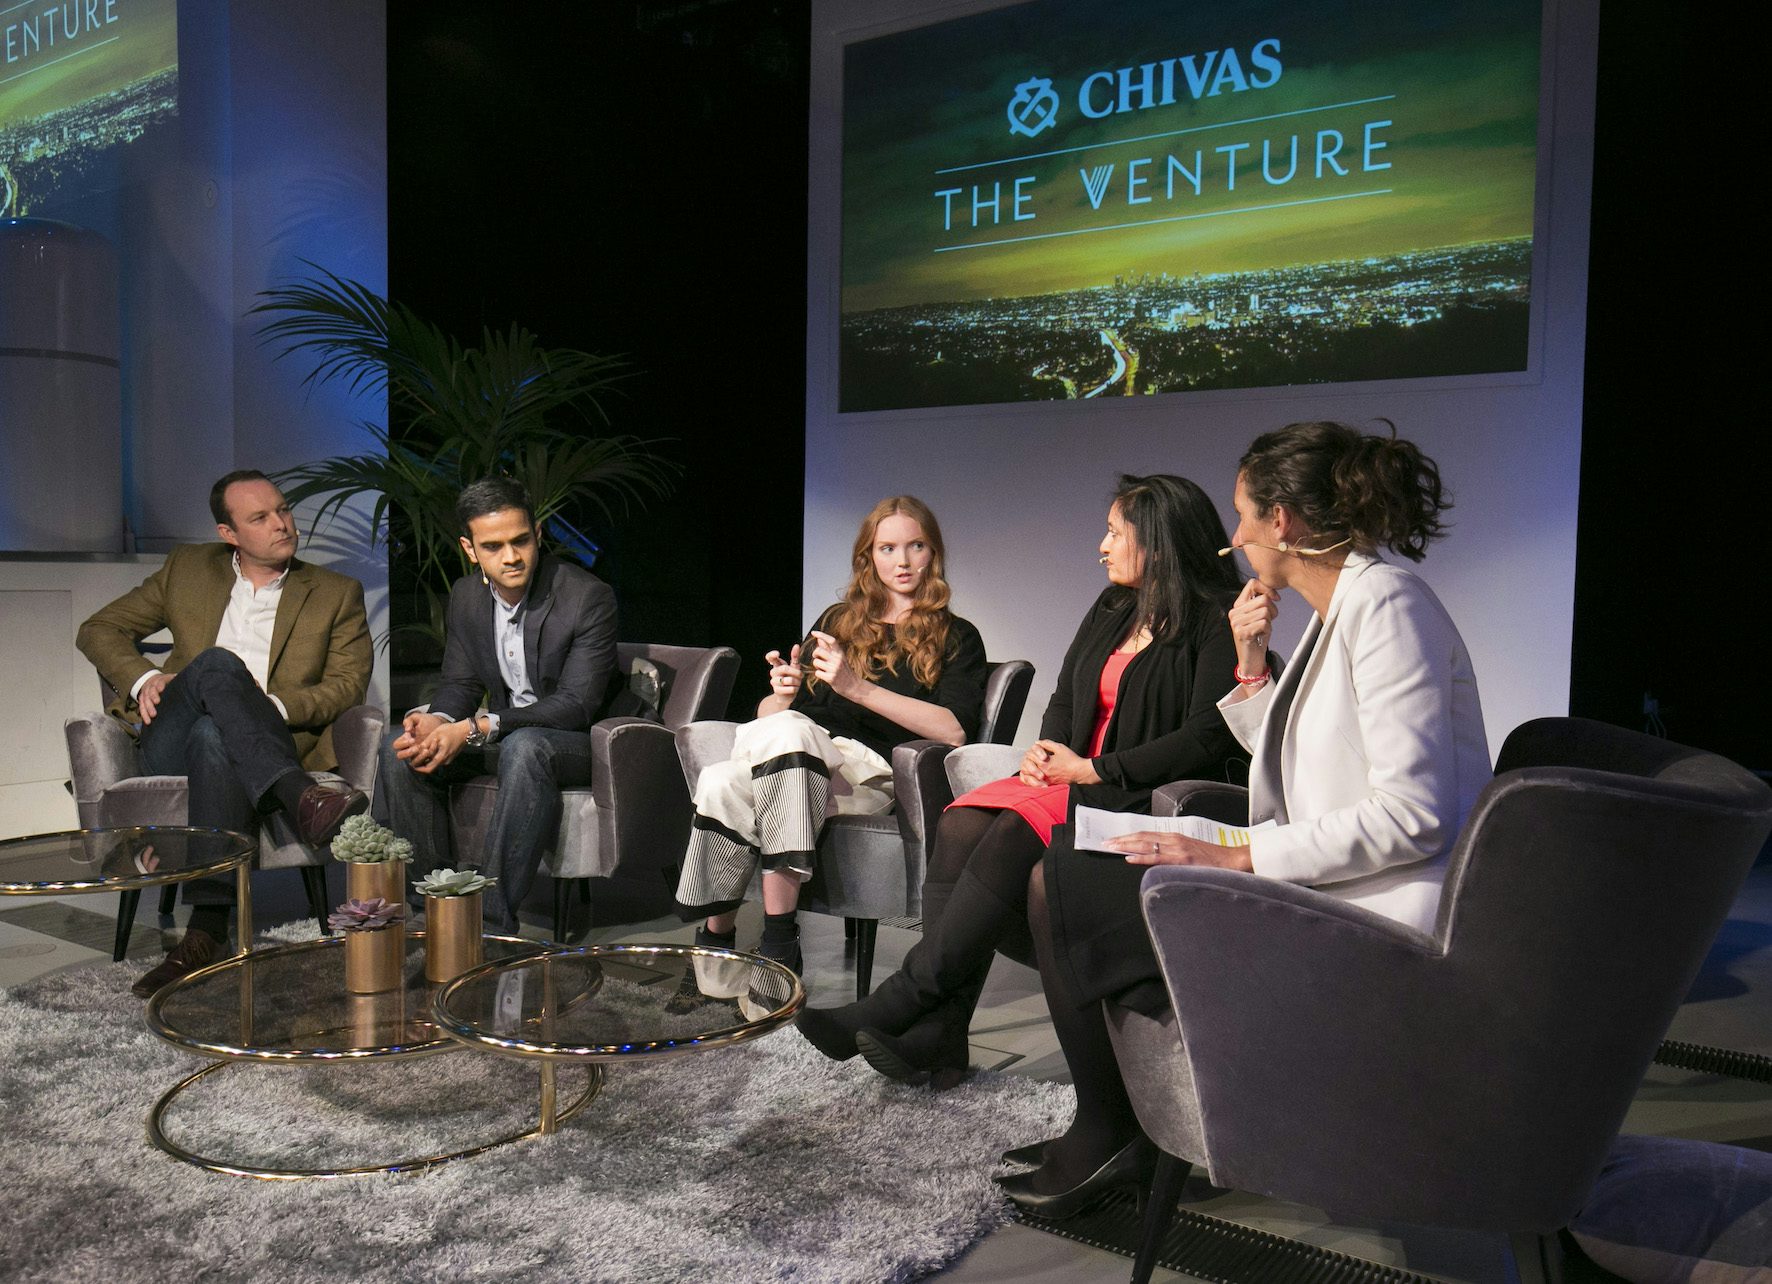 LONDON, ENGLAND - MARCH 17: Thomas Davies, Rajeeb Dey, Lily Cole Sonal Shah and Panel host Daniela Papi-Thorton during a panel discussion on the global impact of social enterprise as part of The Venture – Chivas Regal’s search to find and support the most promising aspiring social entrepreneurs across the world, at Darwin Centre, Natural History Musuem on March 17, 2016 in London, England. (Photo by John Phillips/Getty Images for Chivas) *** Local Caption *** Lily Cole; Rajeeb Dey; Sonal Shah; Thomas Davies; Daniela Papi-Thorton